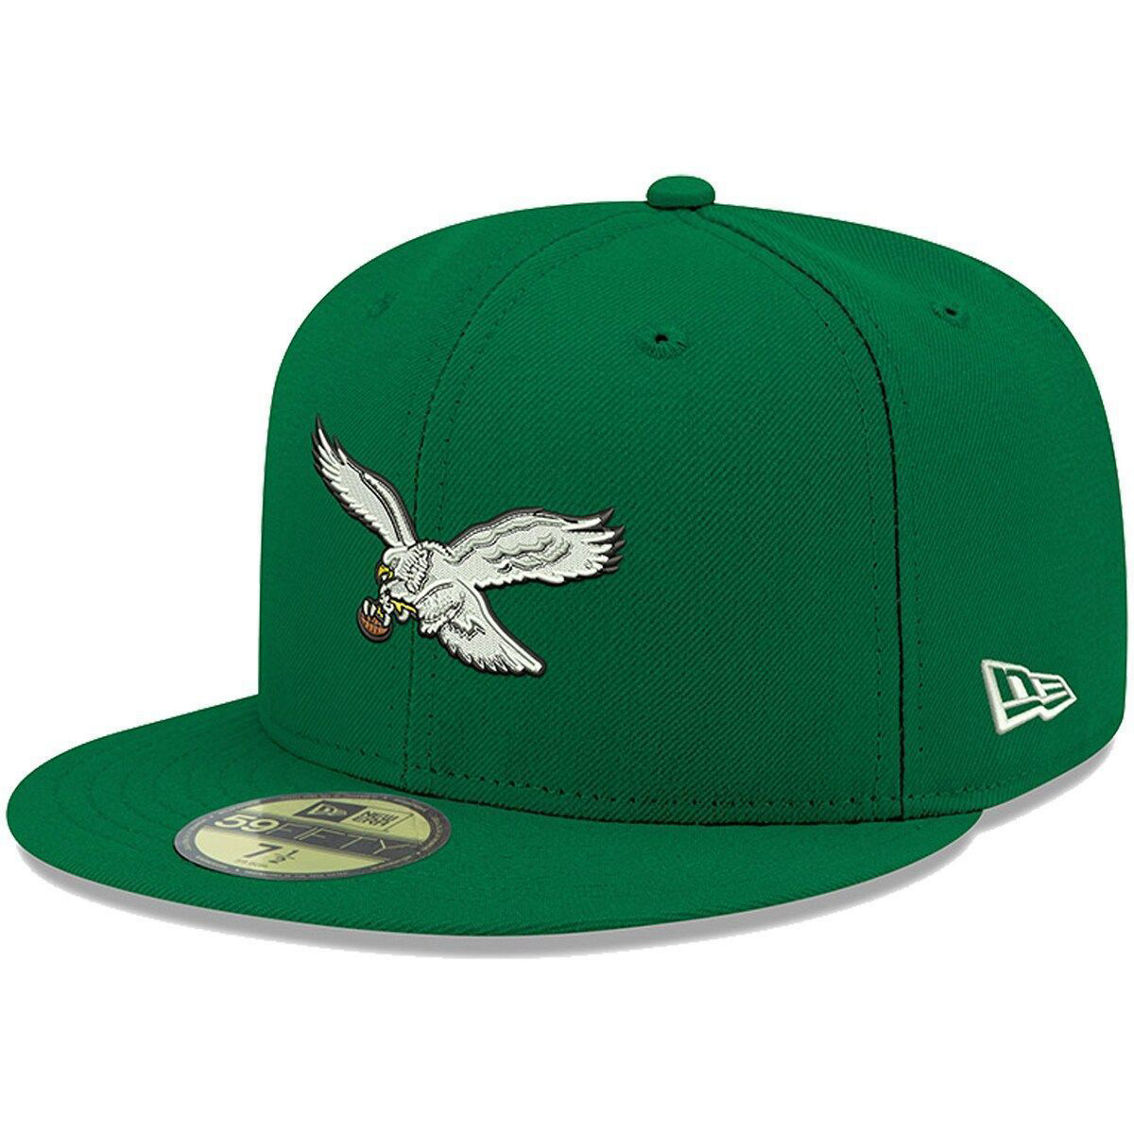 New Era Men's Kelly Green Philadelphia Eagles Omaha Throwback 59FIFTY Fitted Hat - Image 2 of 4